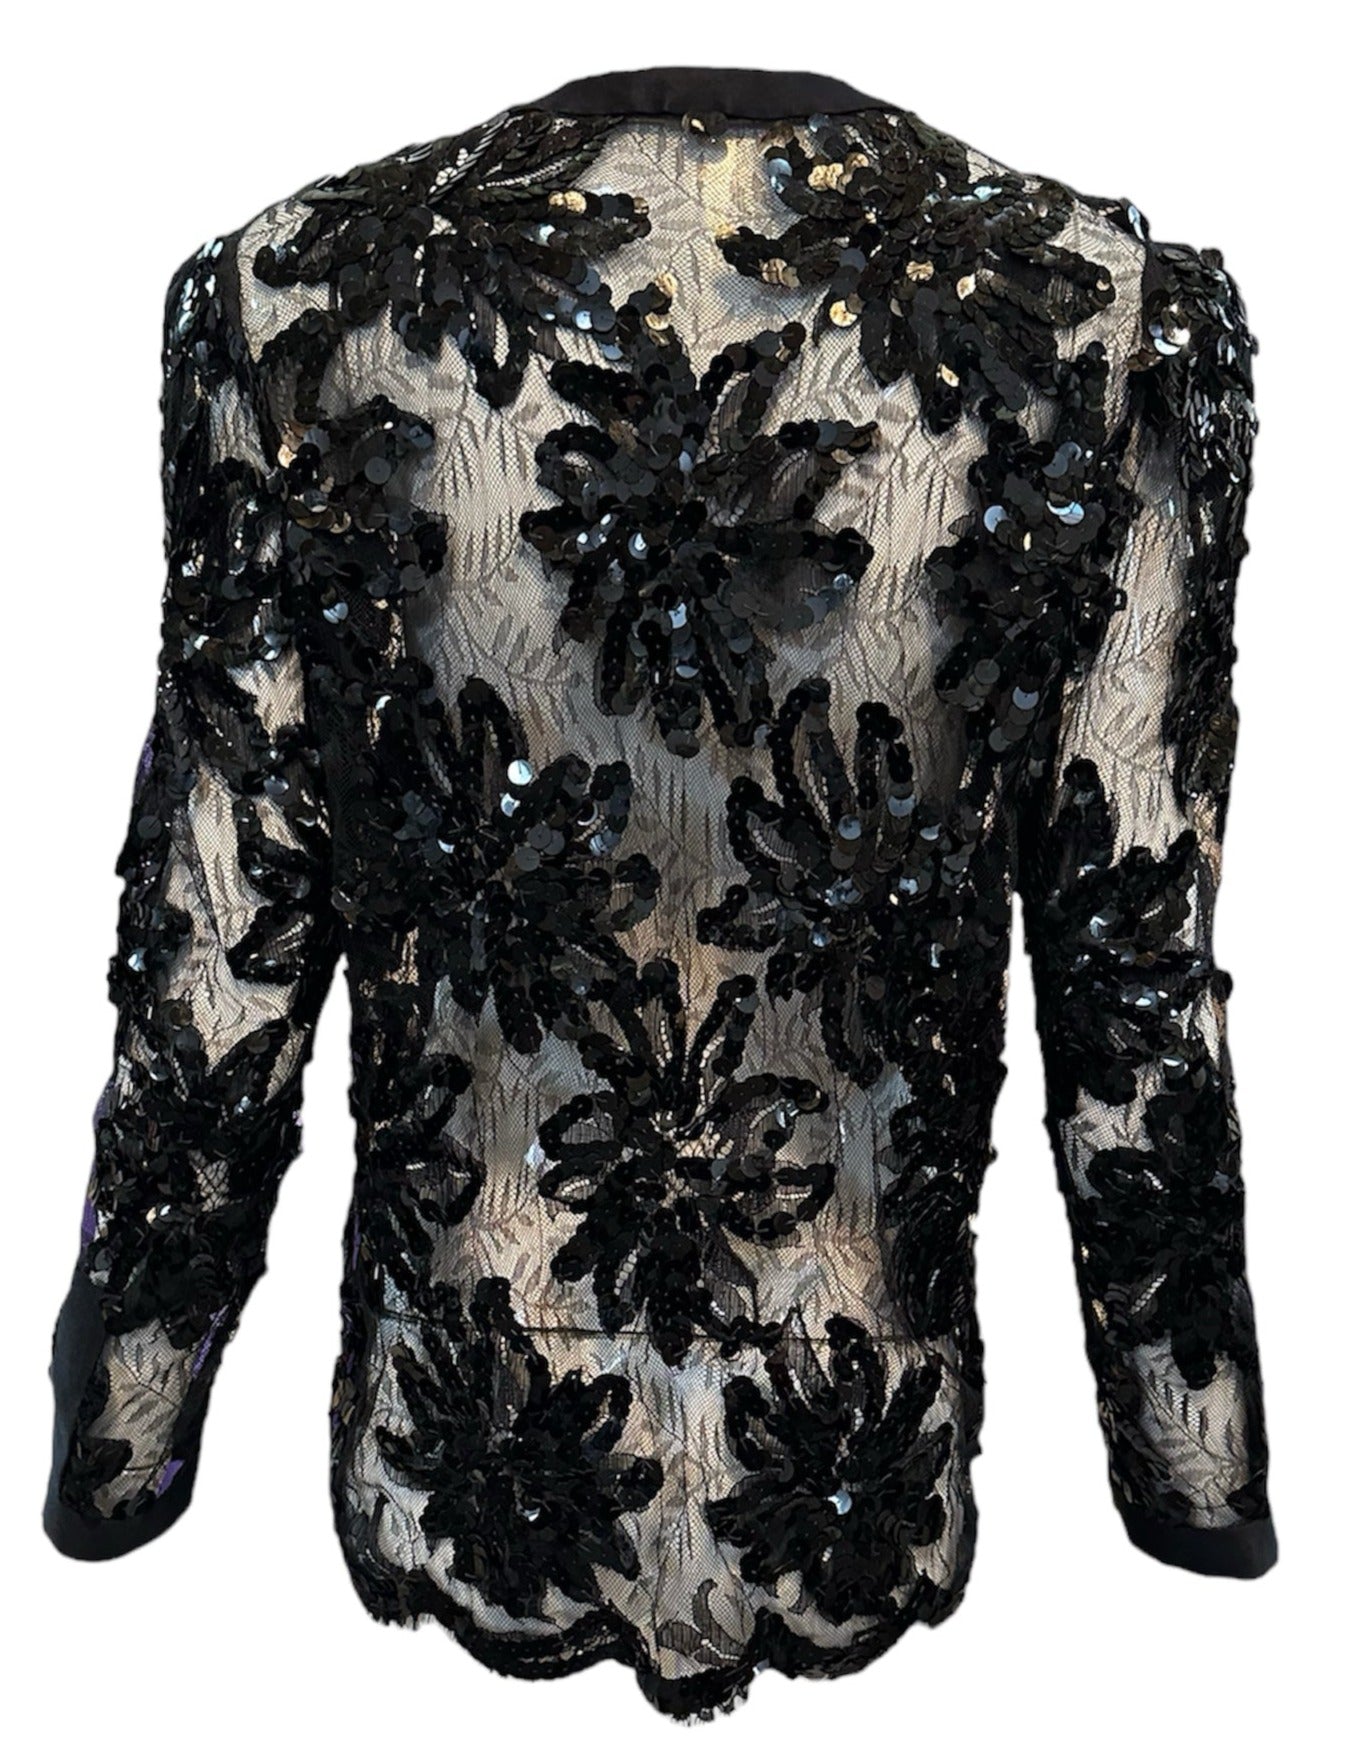    Adolfo 80s Black Chantilly Evening Jacket with Sequin Embellishment BACK 3 of 6